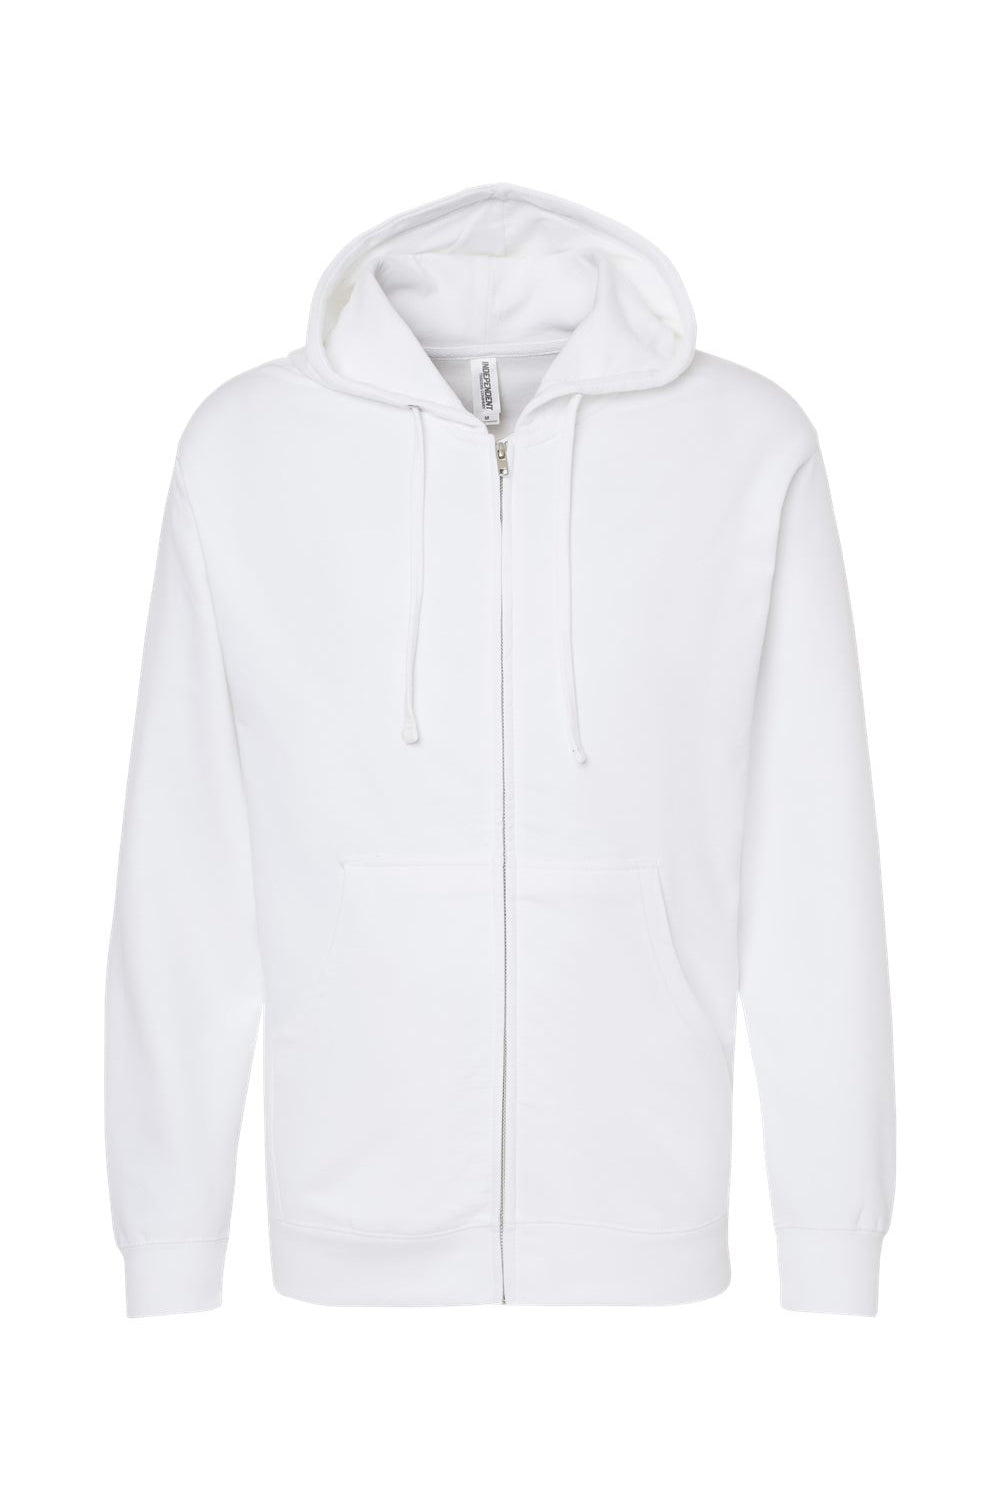 Independent Trading Co. SS4500Z Mens Full Zip Hooded Sweatshirt Hoodie White Flat Front